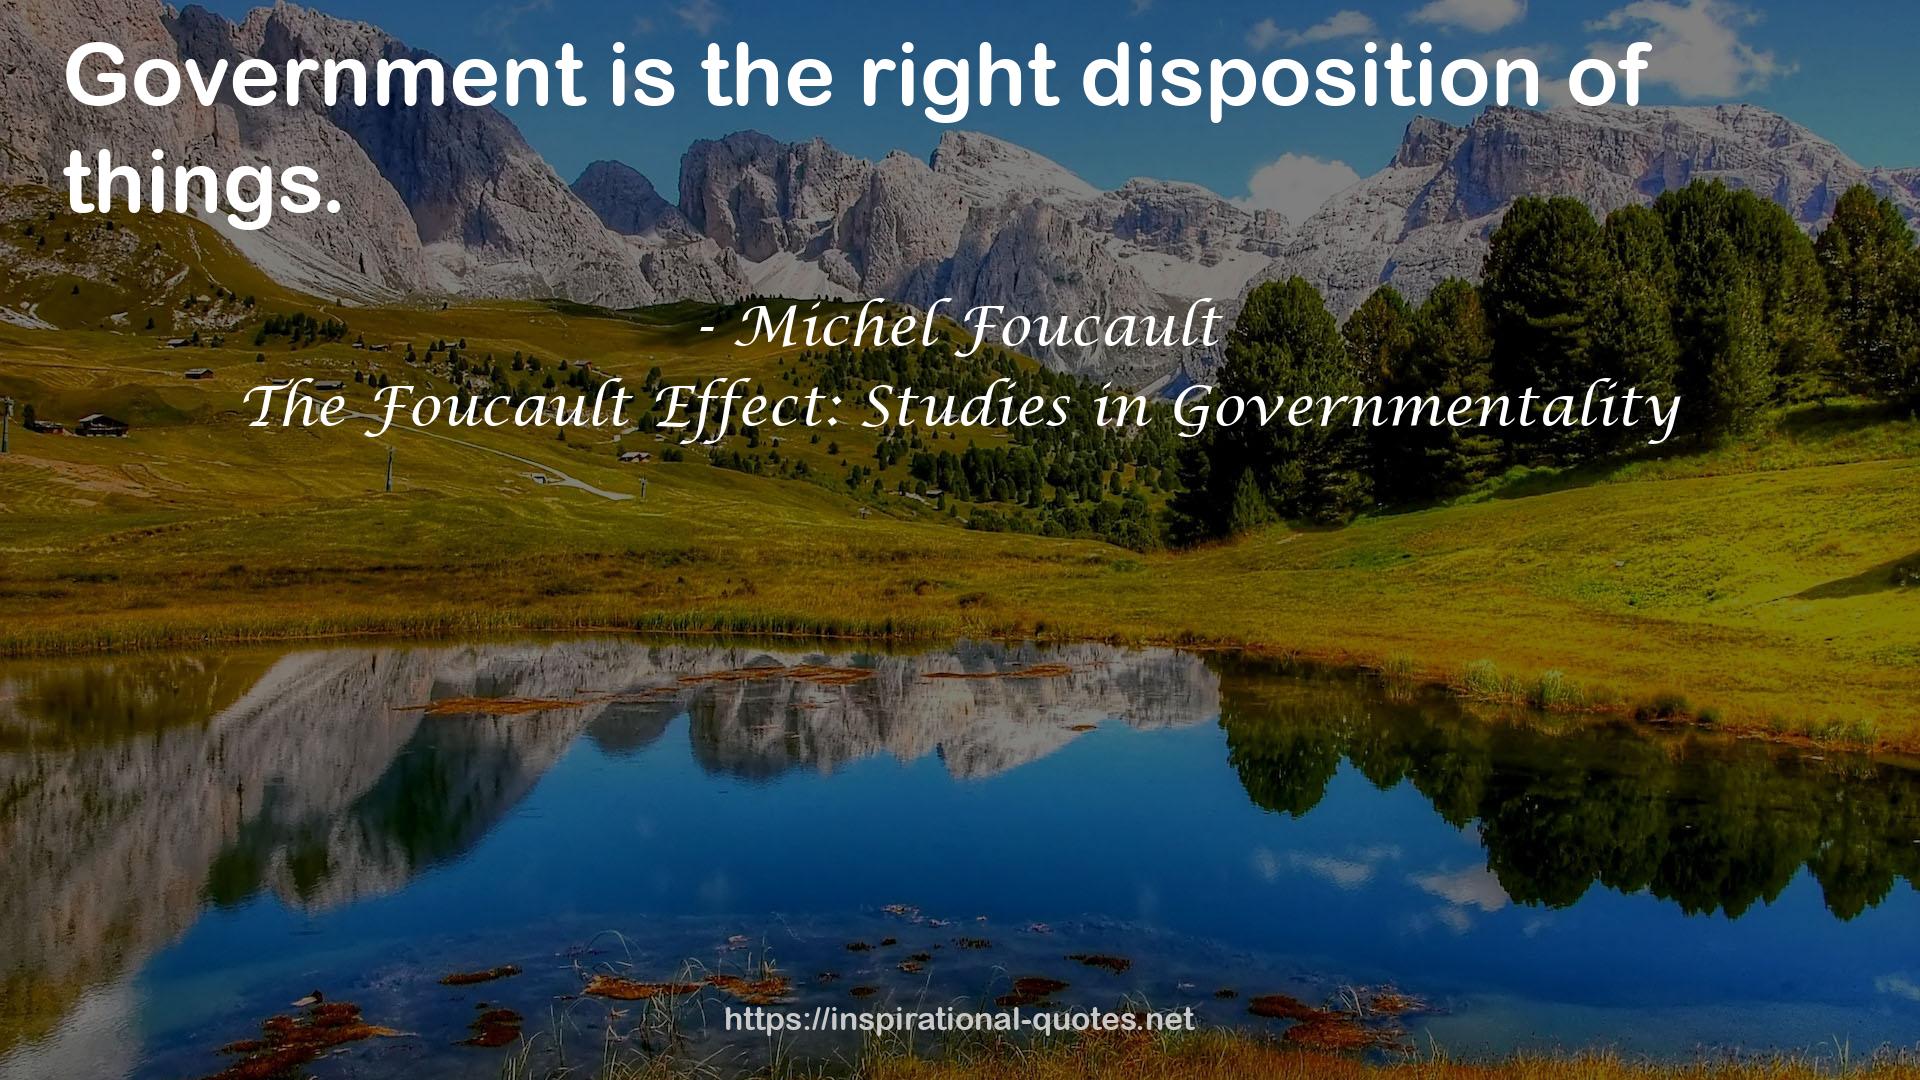 The Foucault Effect: Studies in Governmentality QUOTES